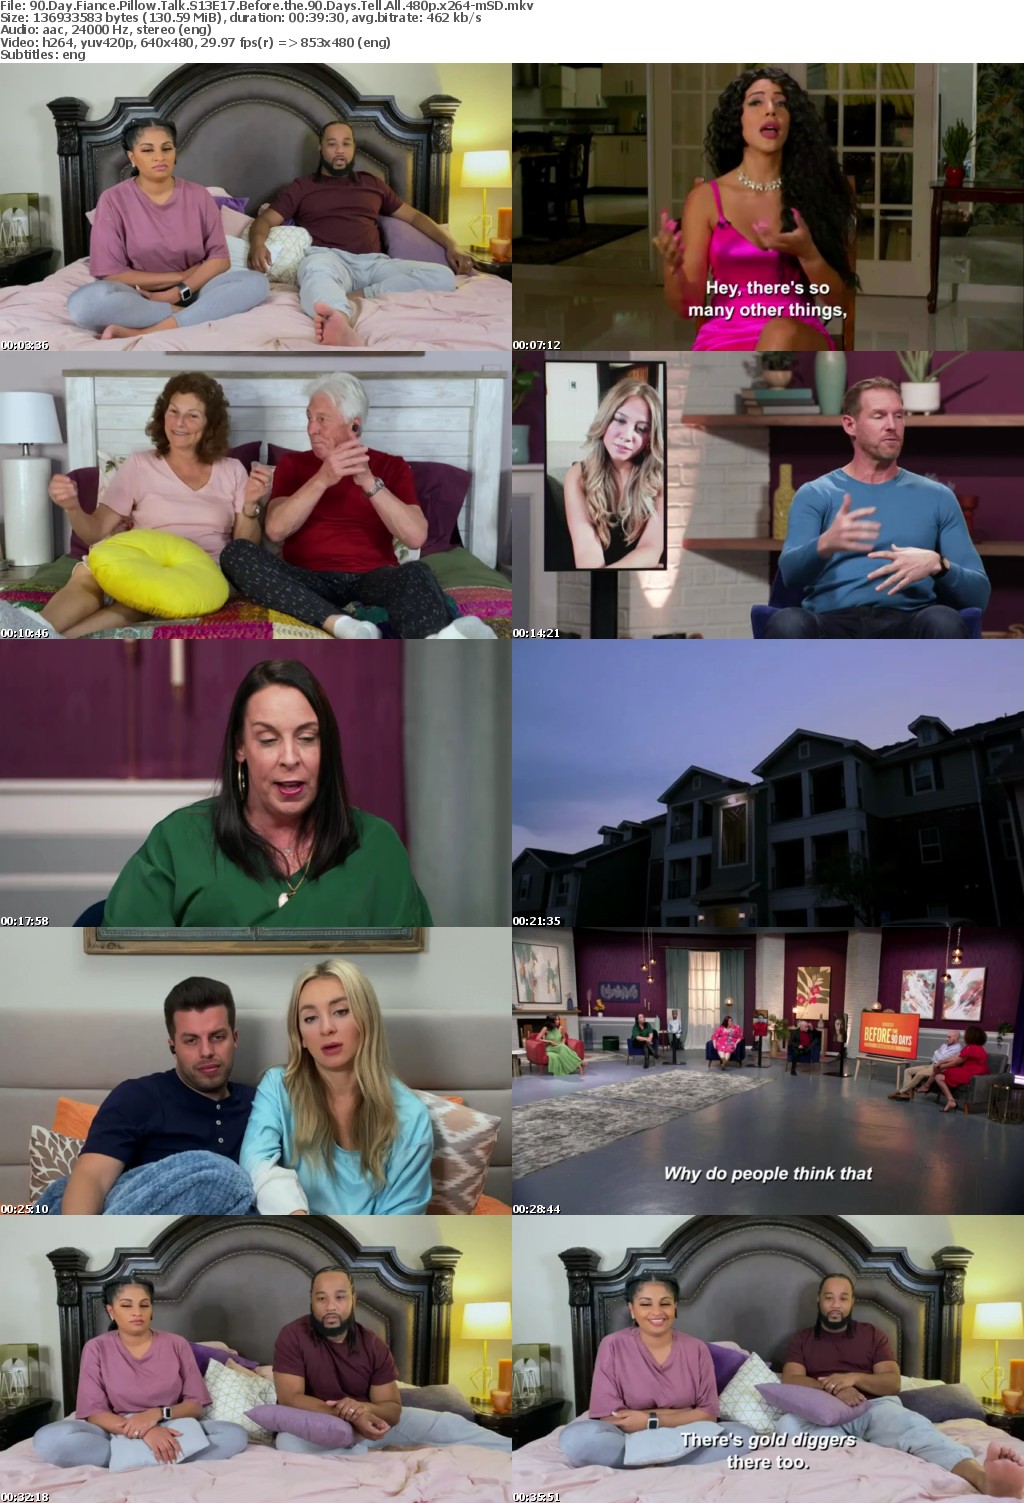 90 Day Fiance Pillow Talk S13E17 Before the 90 Days Tell All 480p x264-mSD